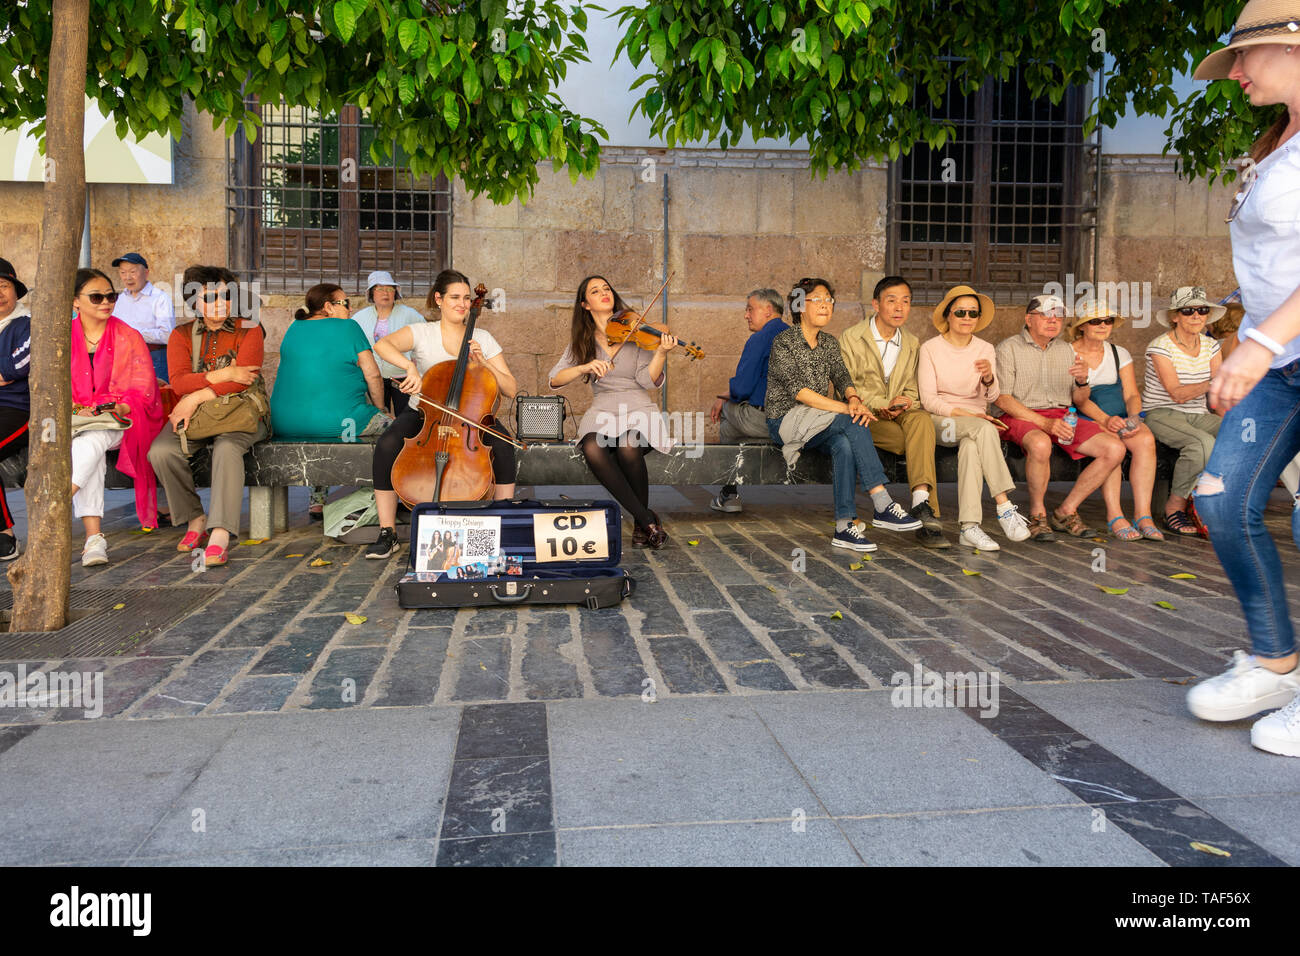 Cello and violin players entertaining tourists outside the cathedral at Cordoba, Andalusia region, Spain Stock Photo